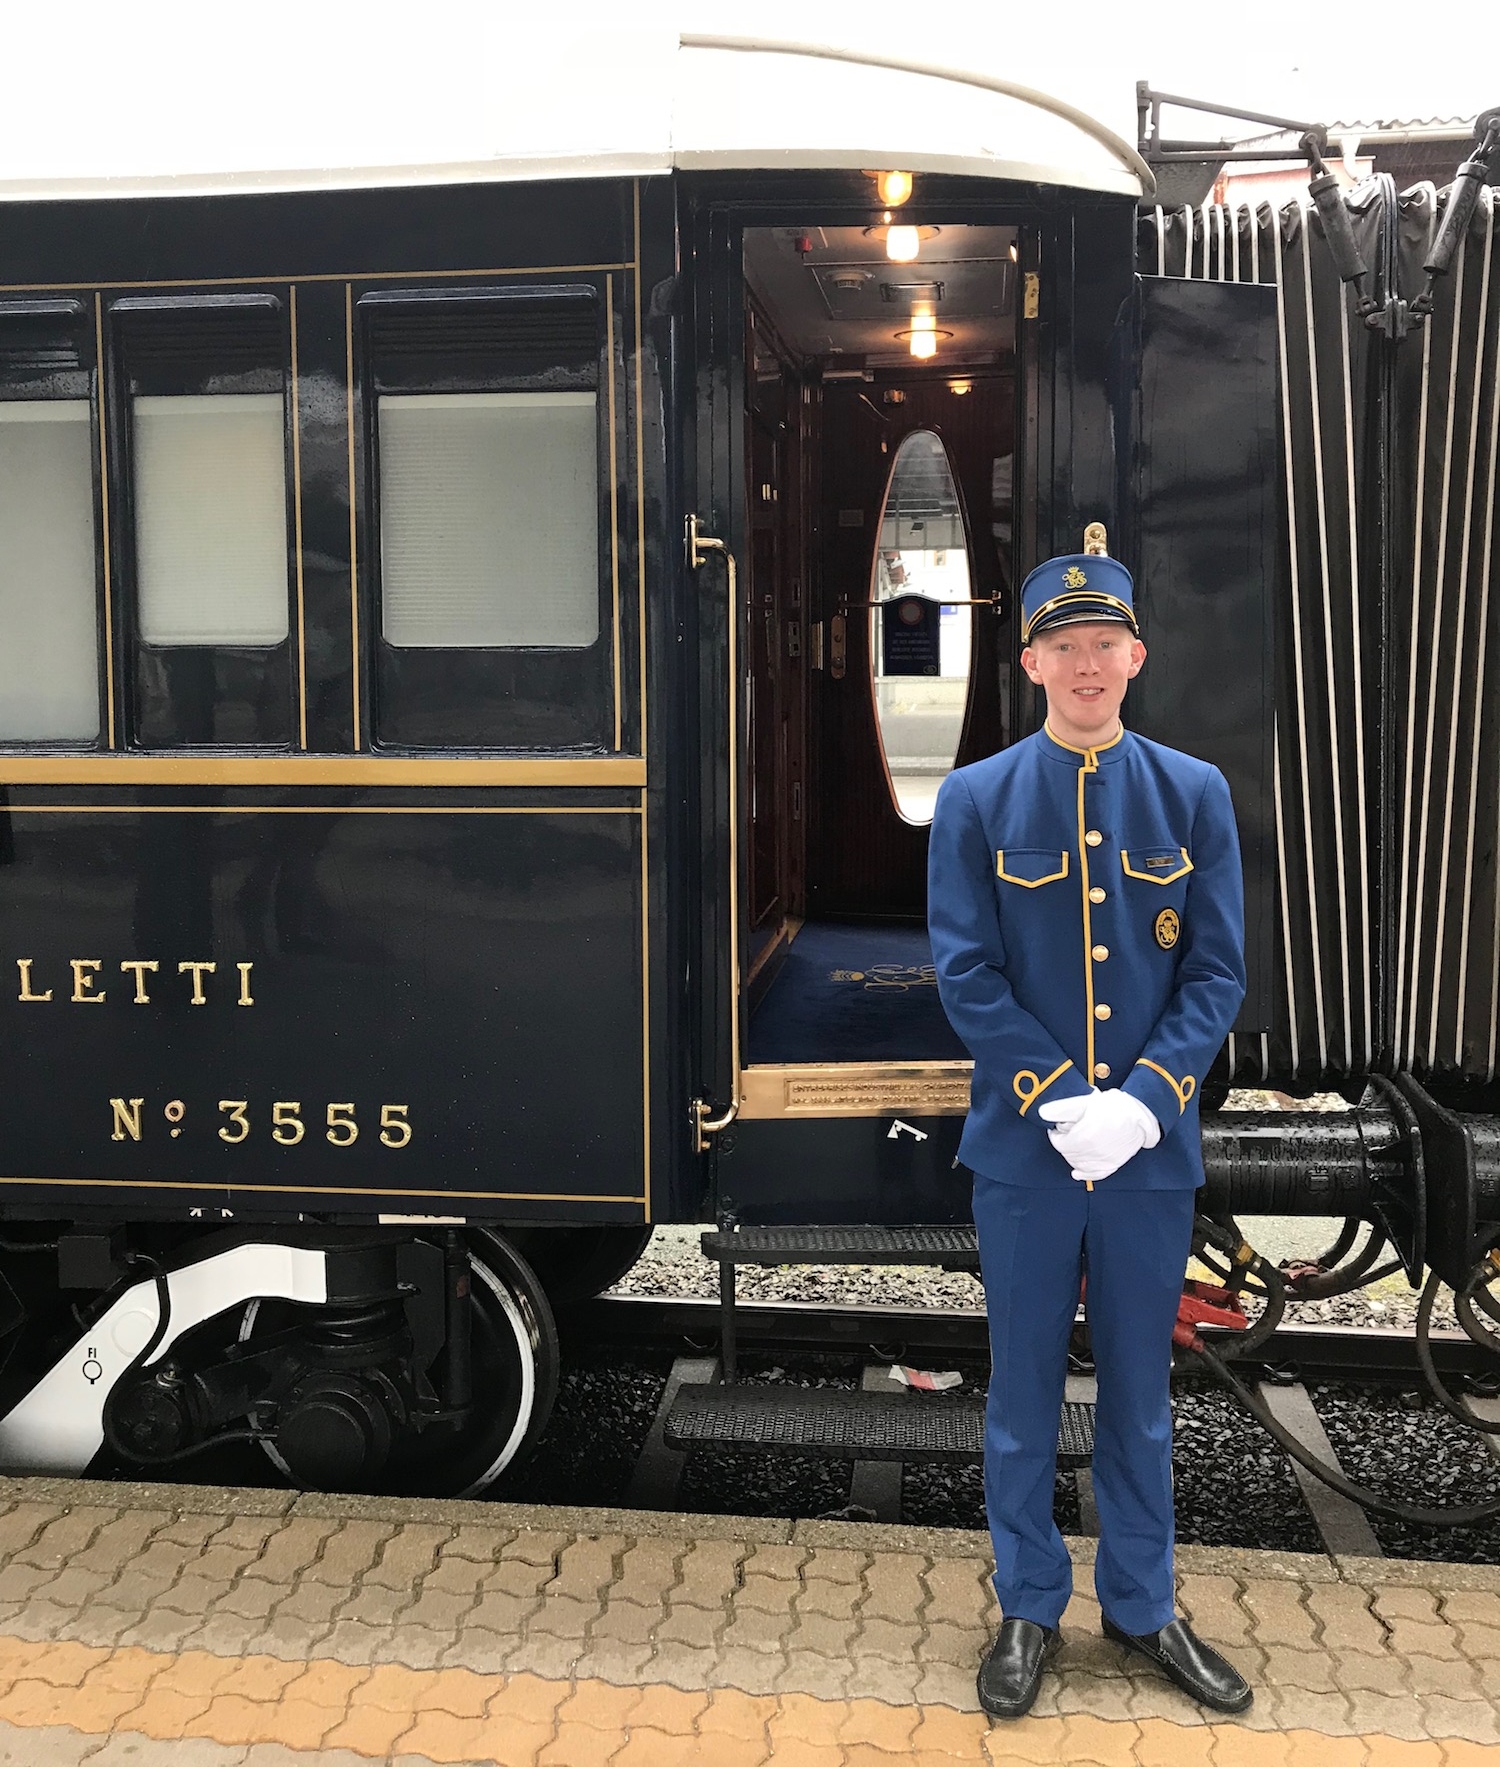 A-BROAD ONBOARD THE ORIENT EXPRESS — A-Broad In London